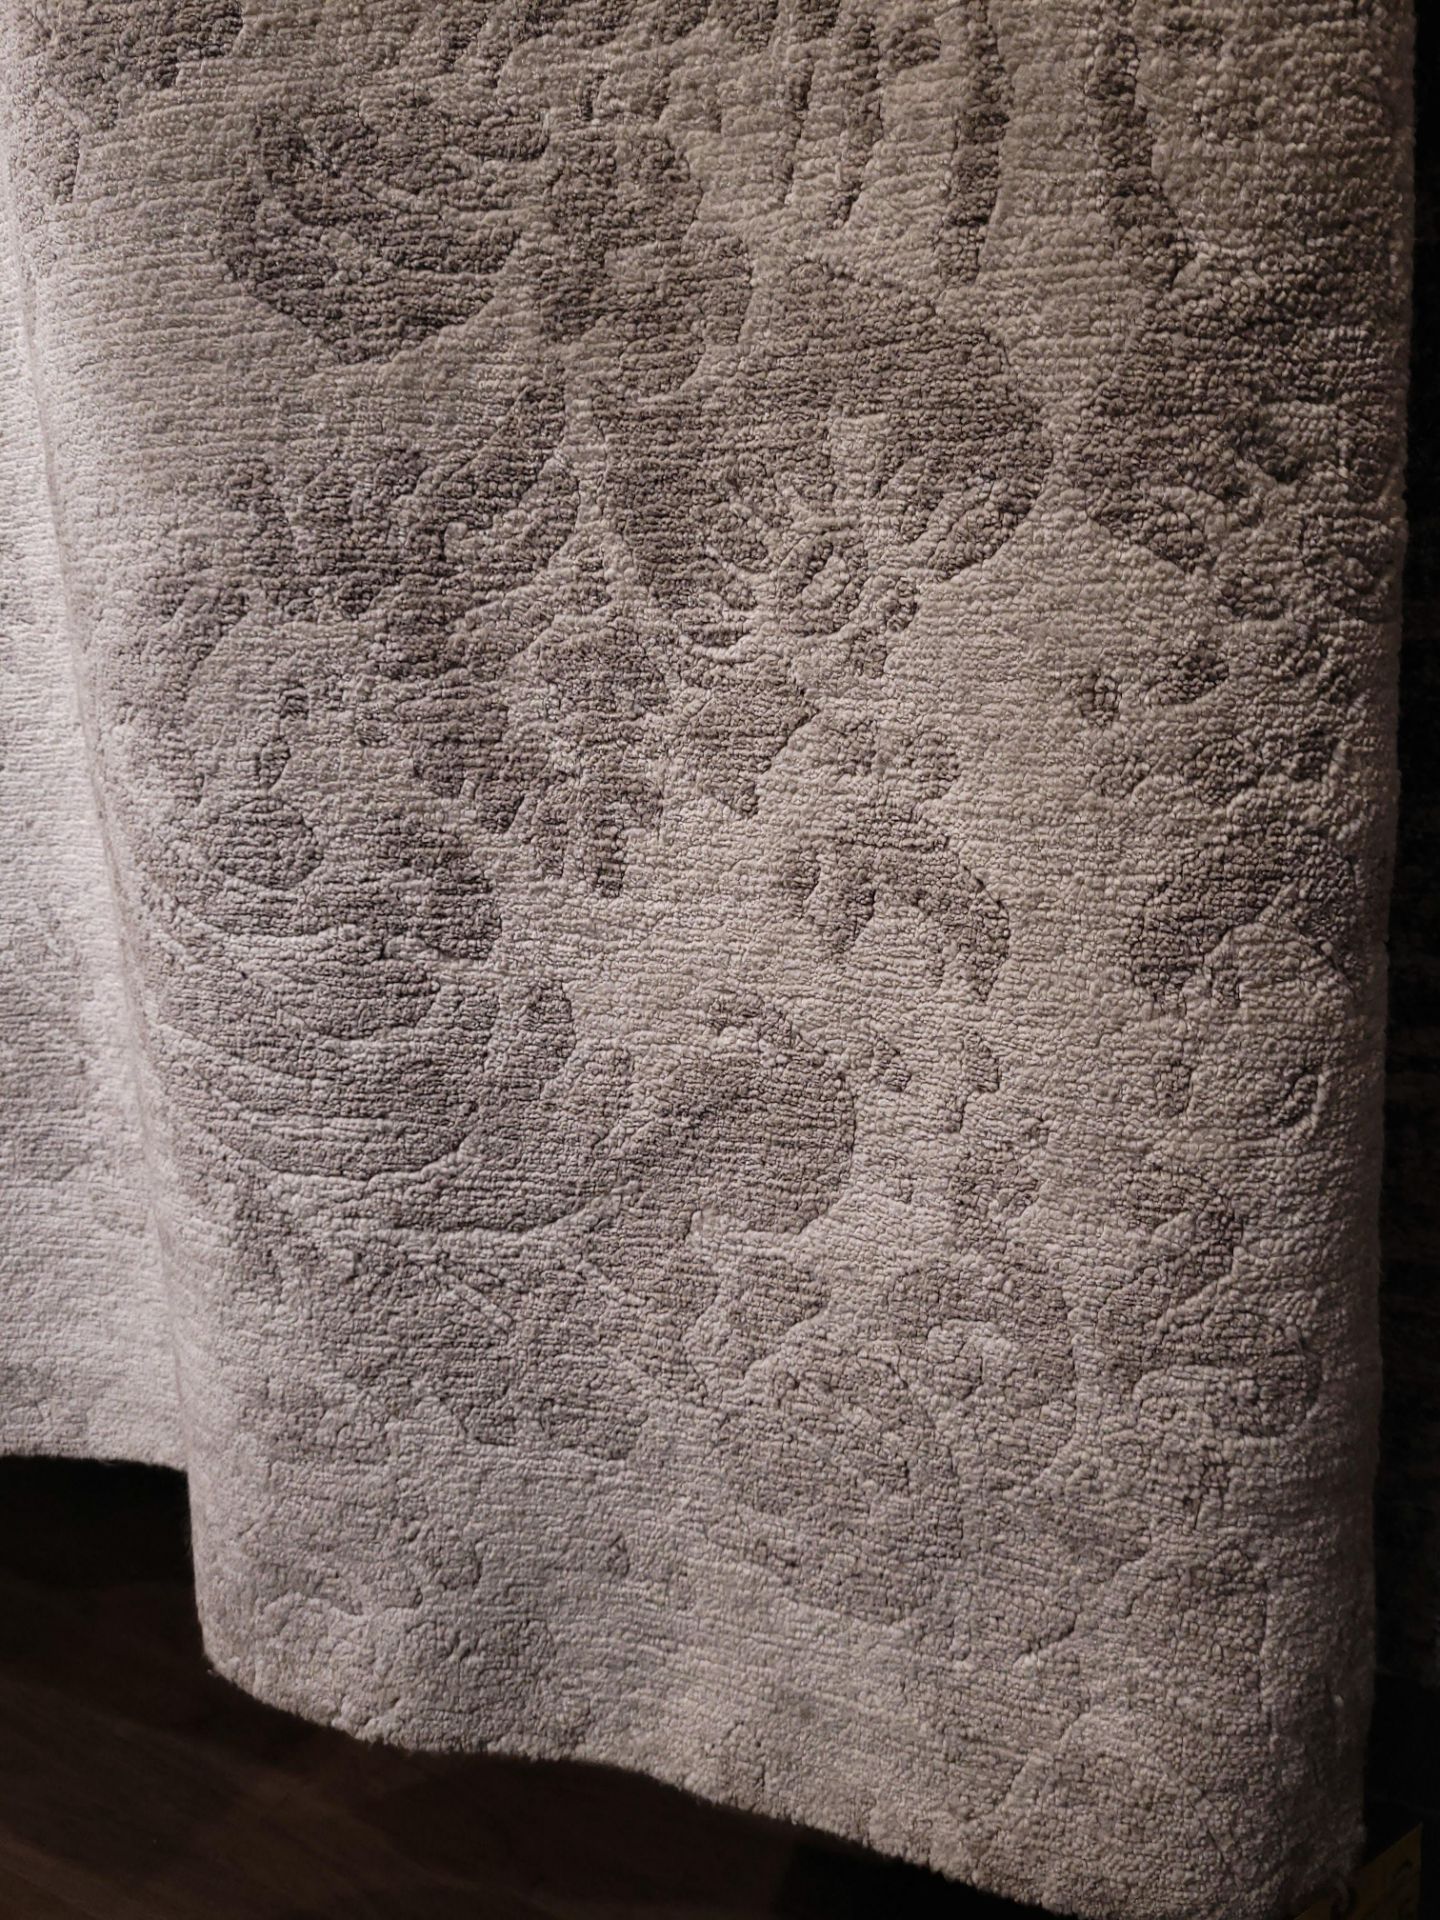 8' X 10' OPAL WHITE/SILVER BAMBOO HAND KNOTTED - MSRP $5,897.00 - INVENTORY CODE: OPUUA752SKWS - Image 2 of 5